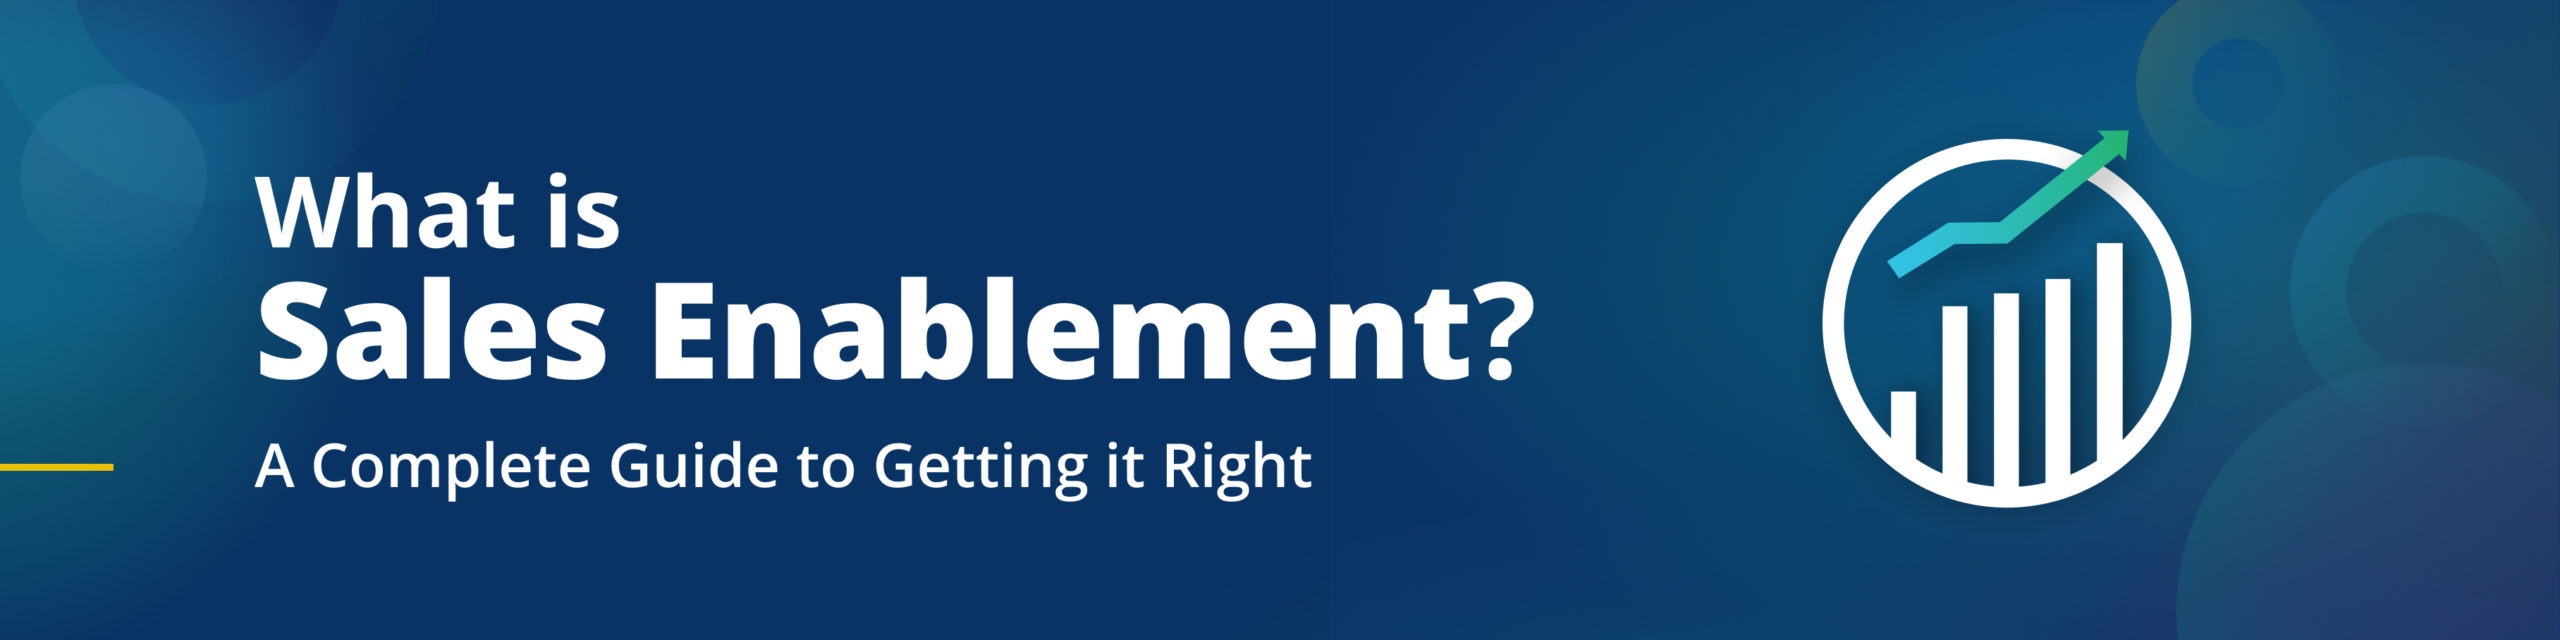 What is Sales Enablement blog banner